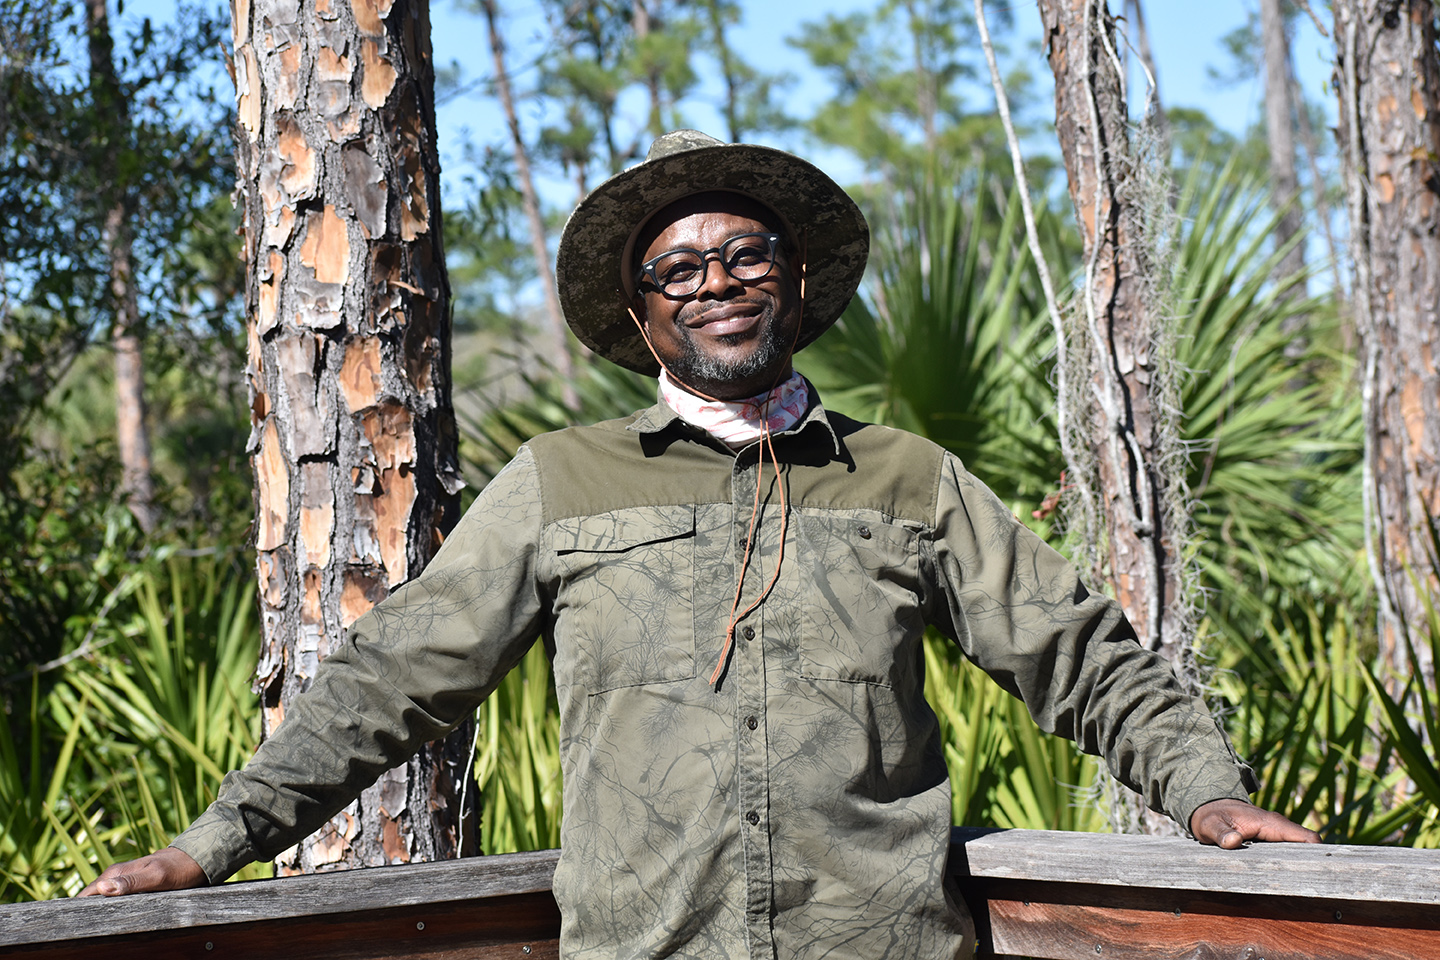 A smiling man wearing camouflage clothes standing in front of a forest.